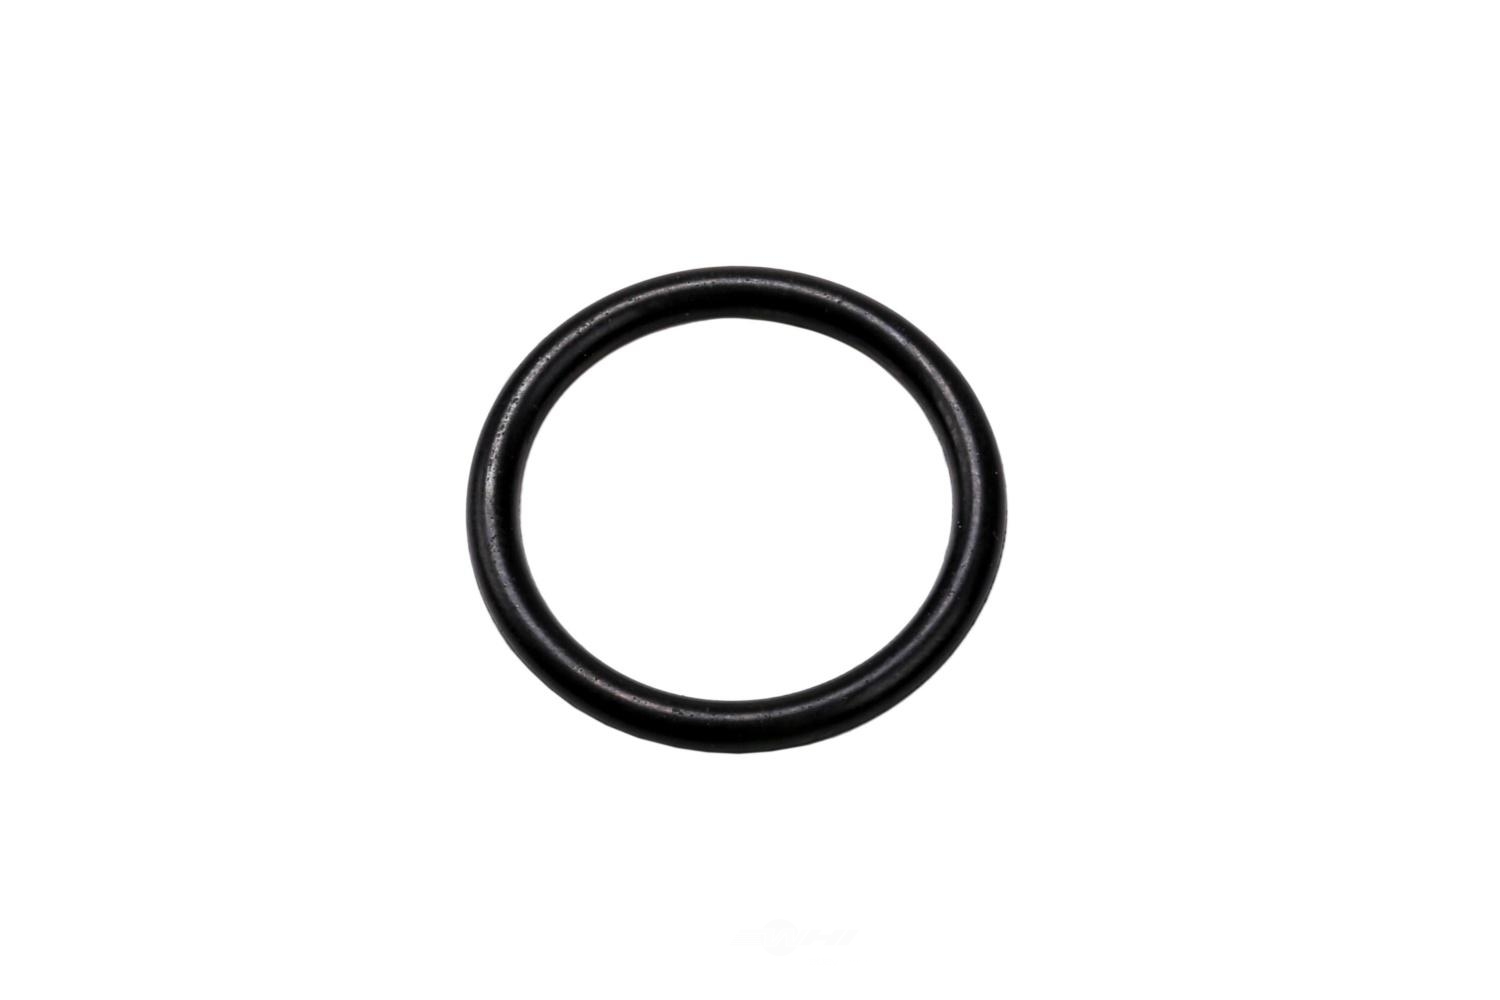 GM GENUINE PARTS - Automatic Transmission Fluid Filler Tube Seal - GMP 25188305